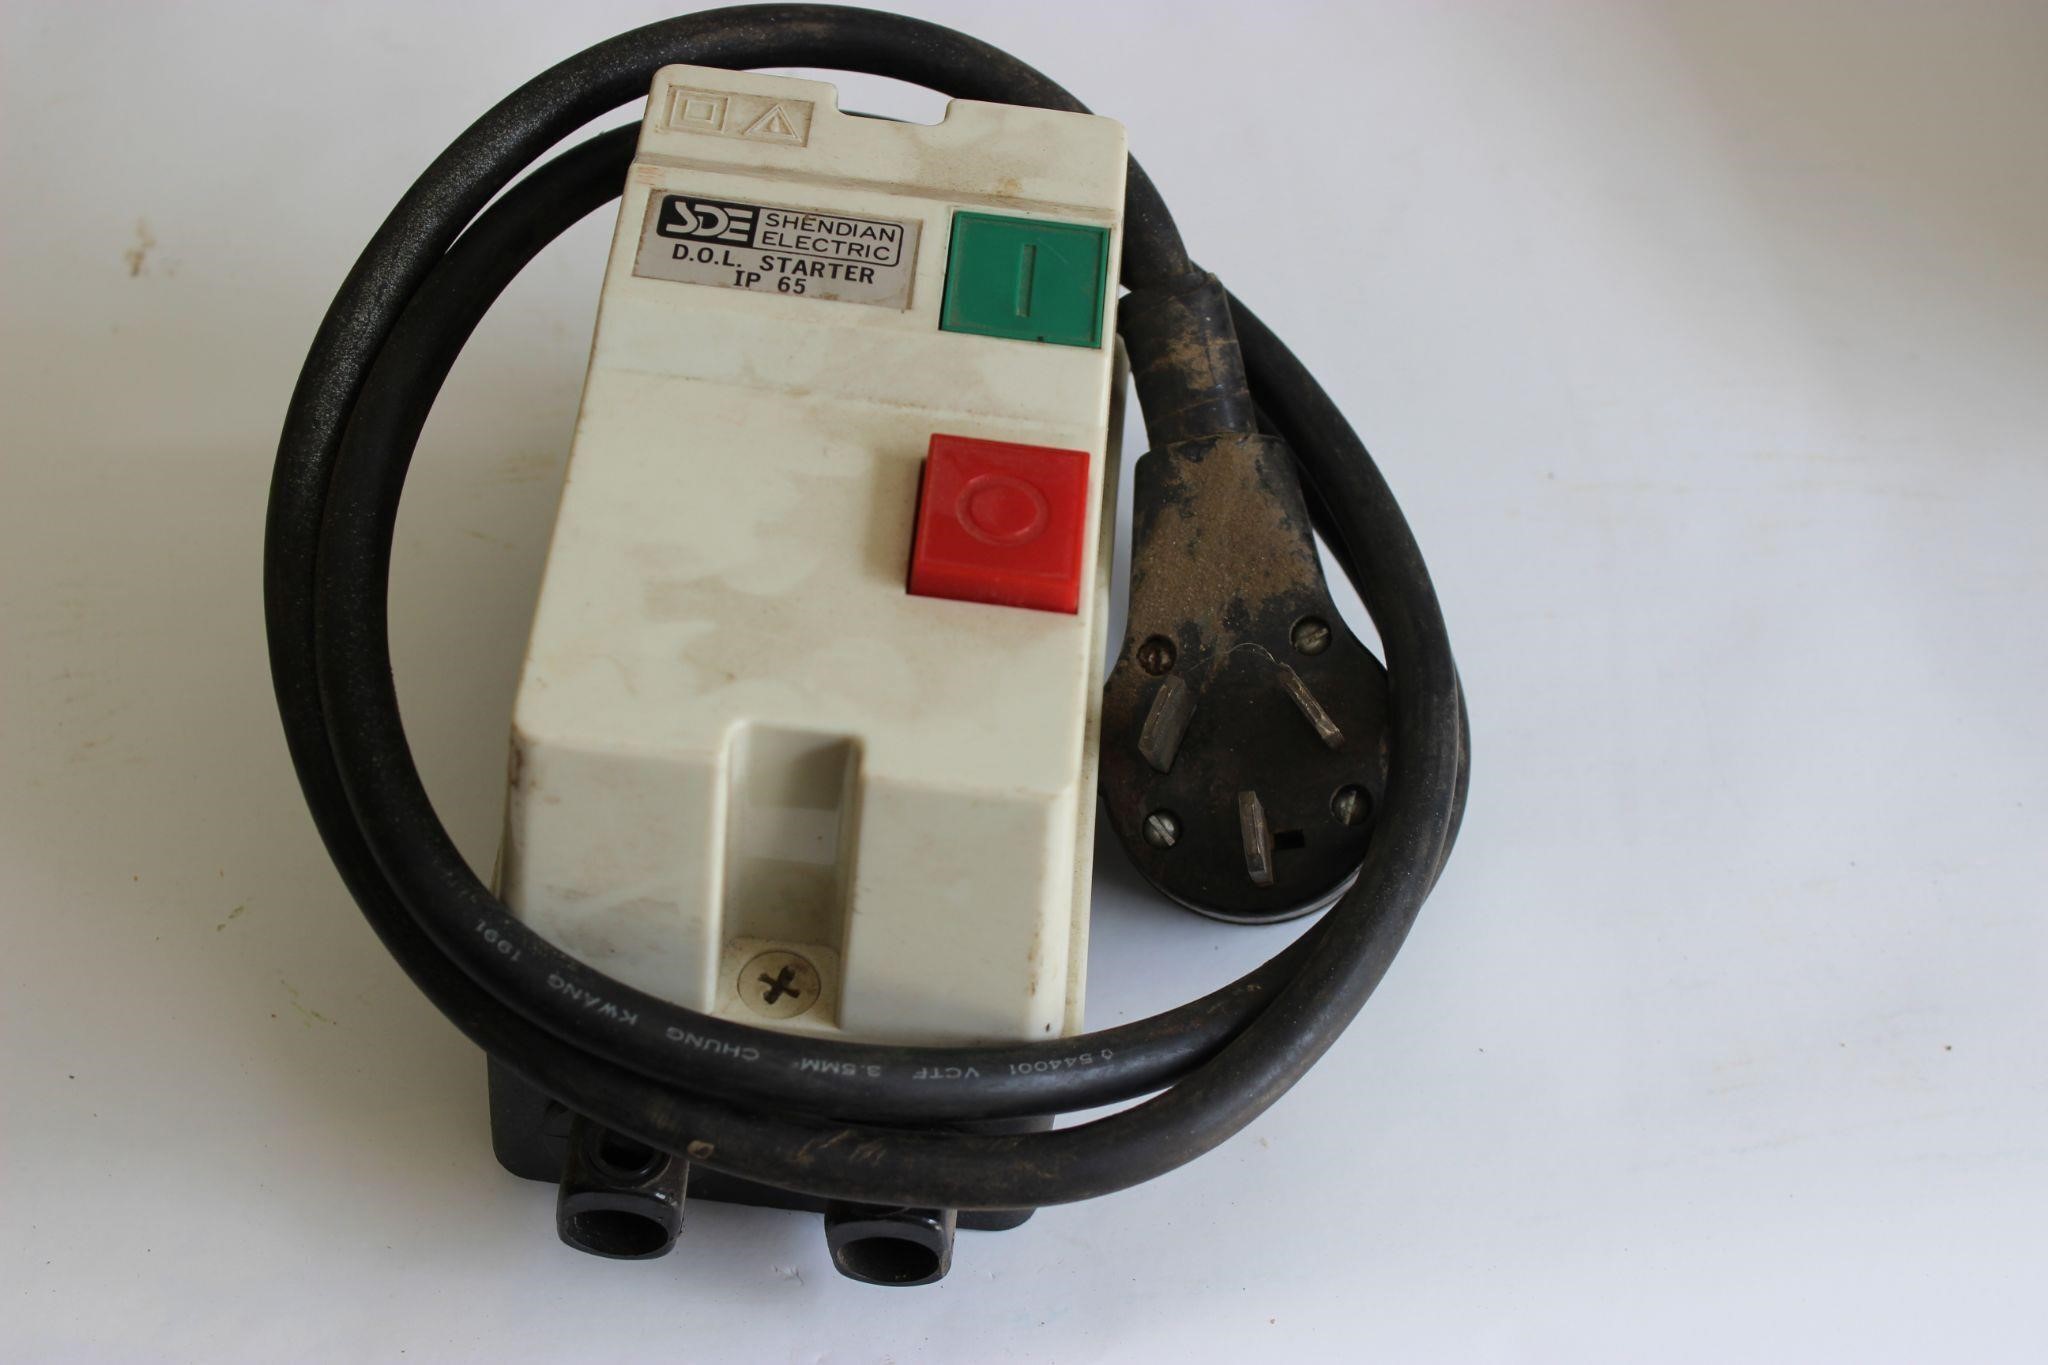 Electrical starter switch